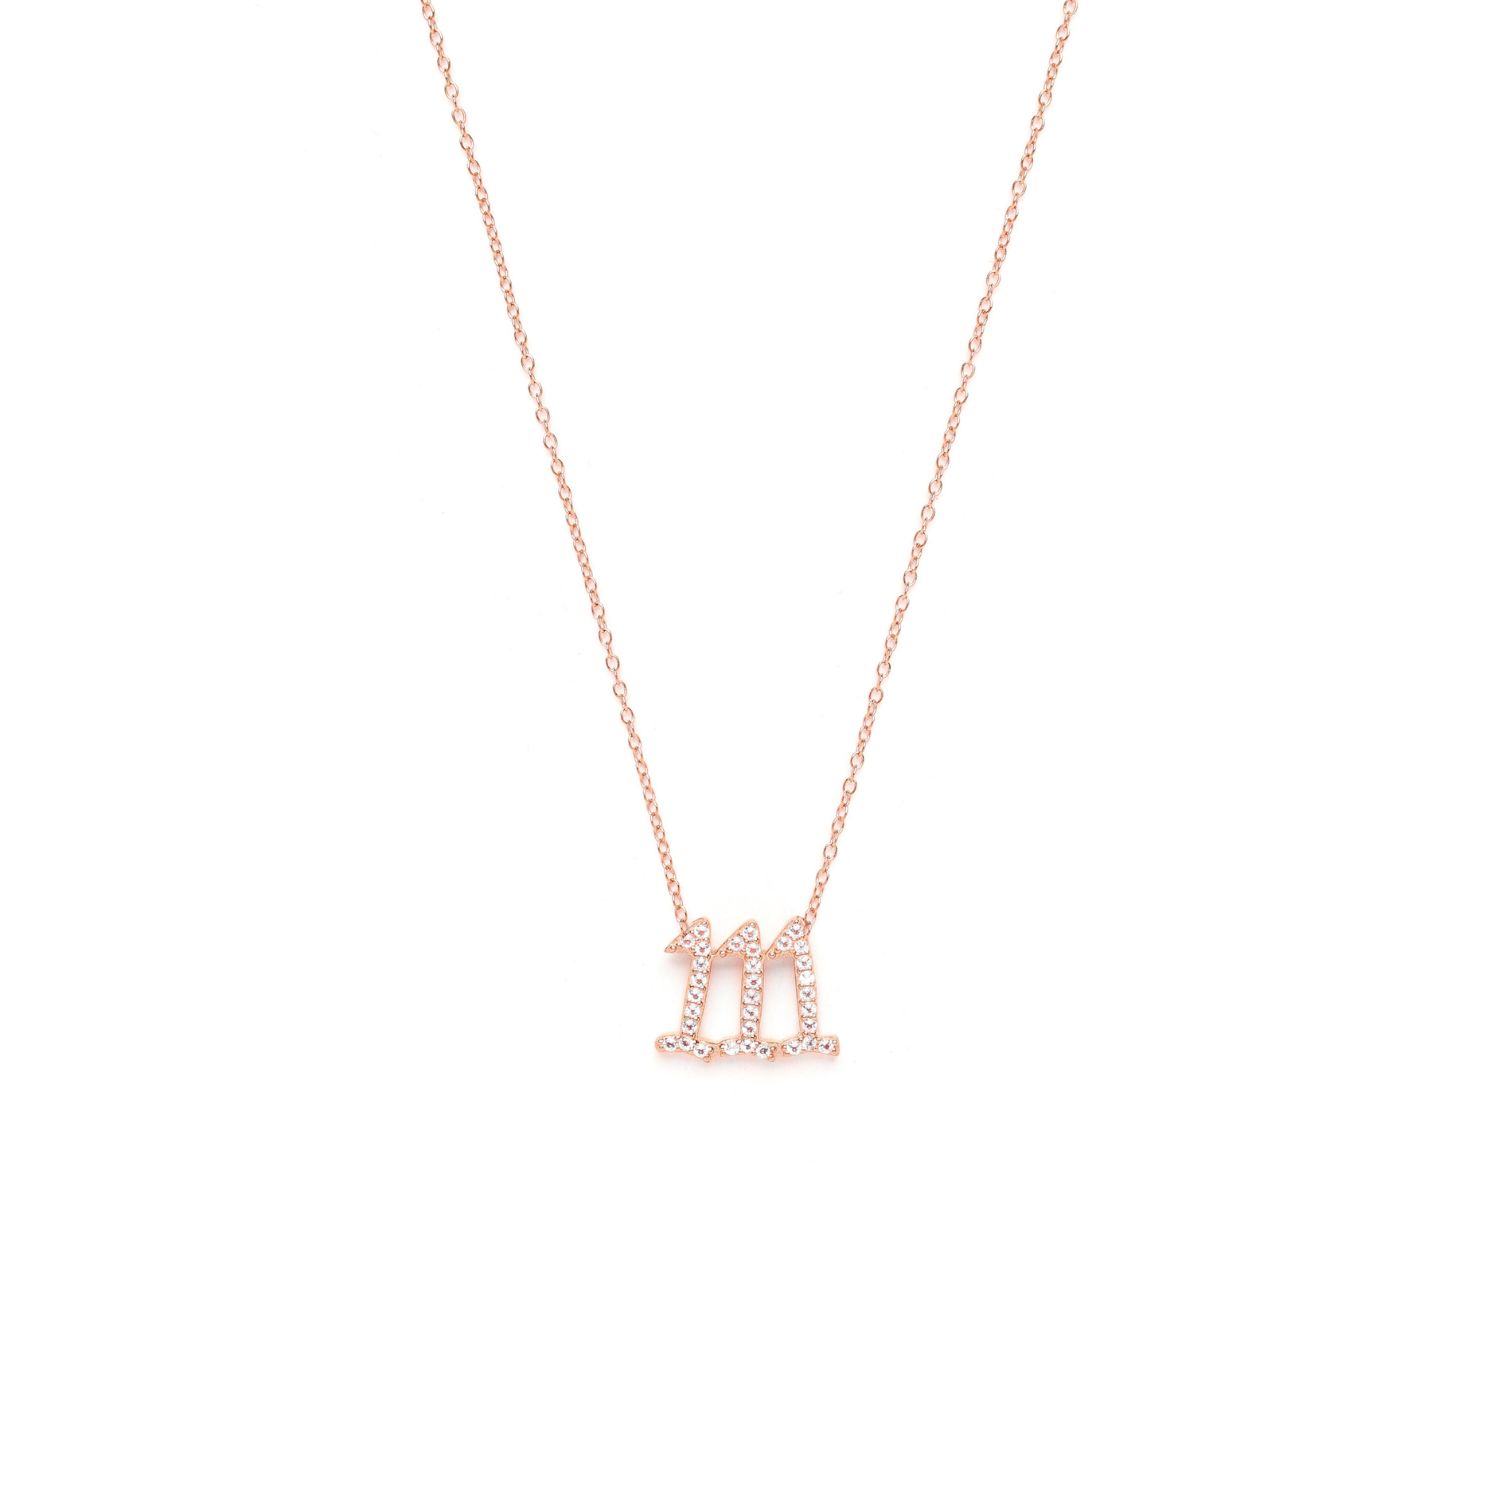 Women’s One One One Angel Number Manifestation Necklace, White Topaz, Rose Gold Seven Saints